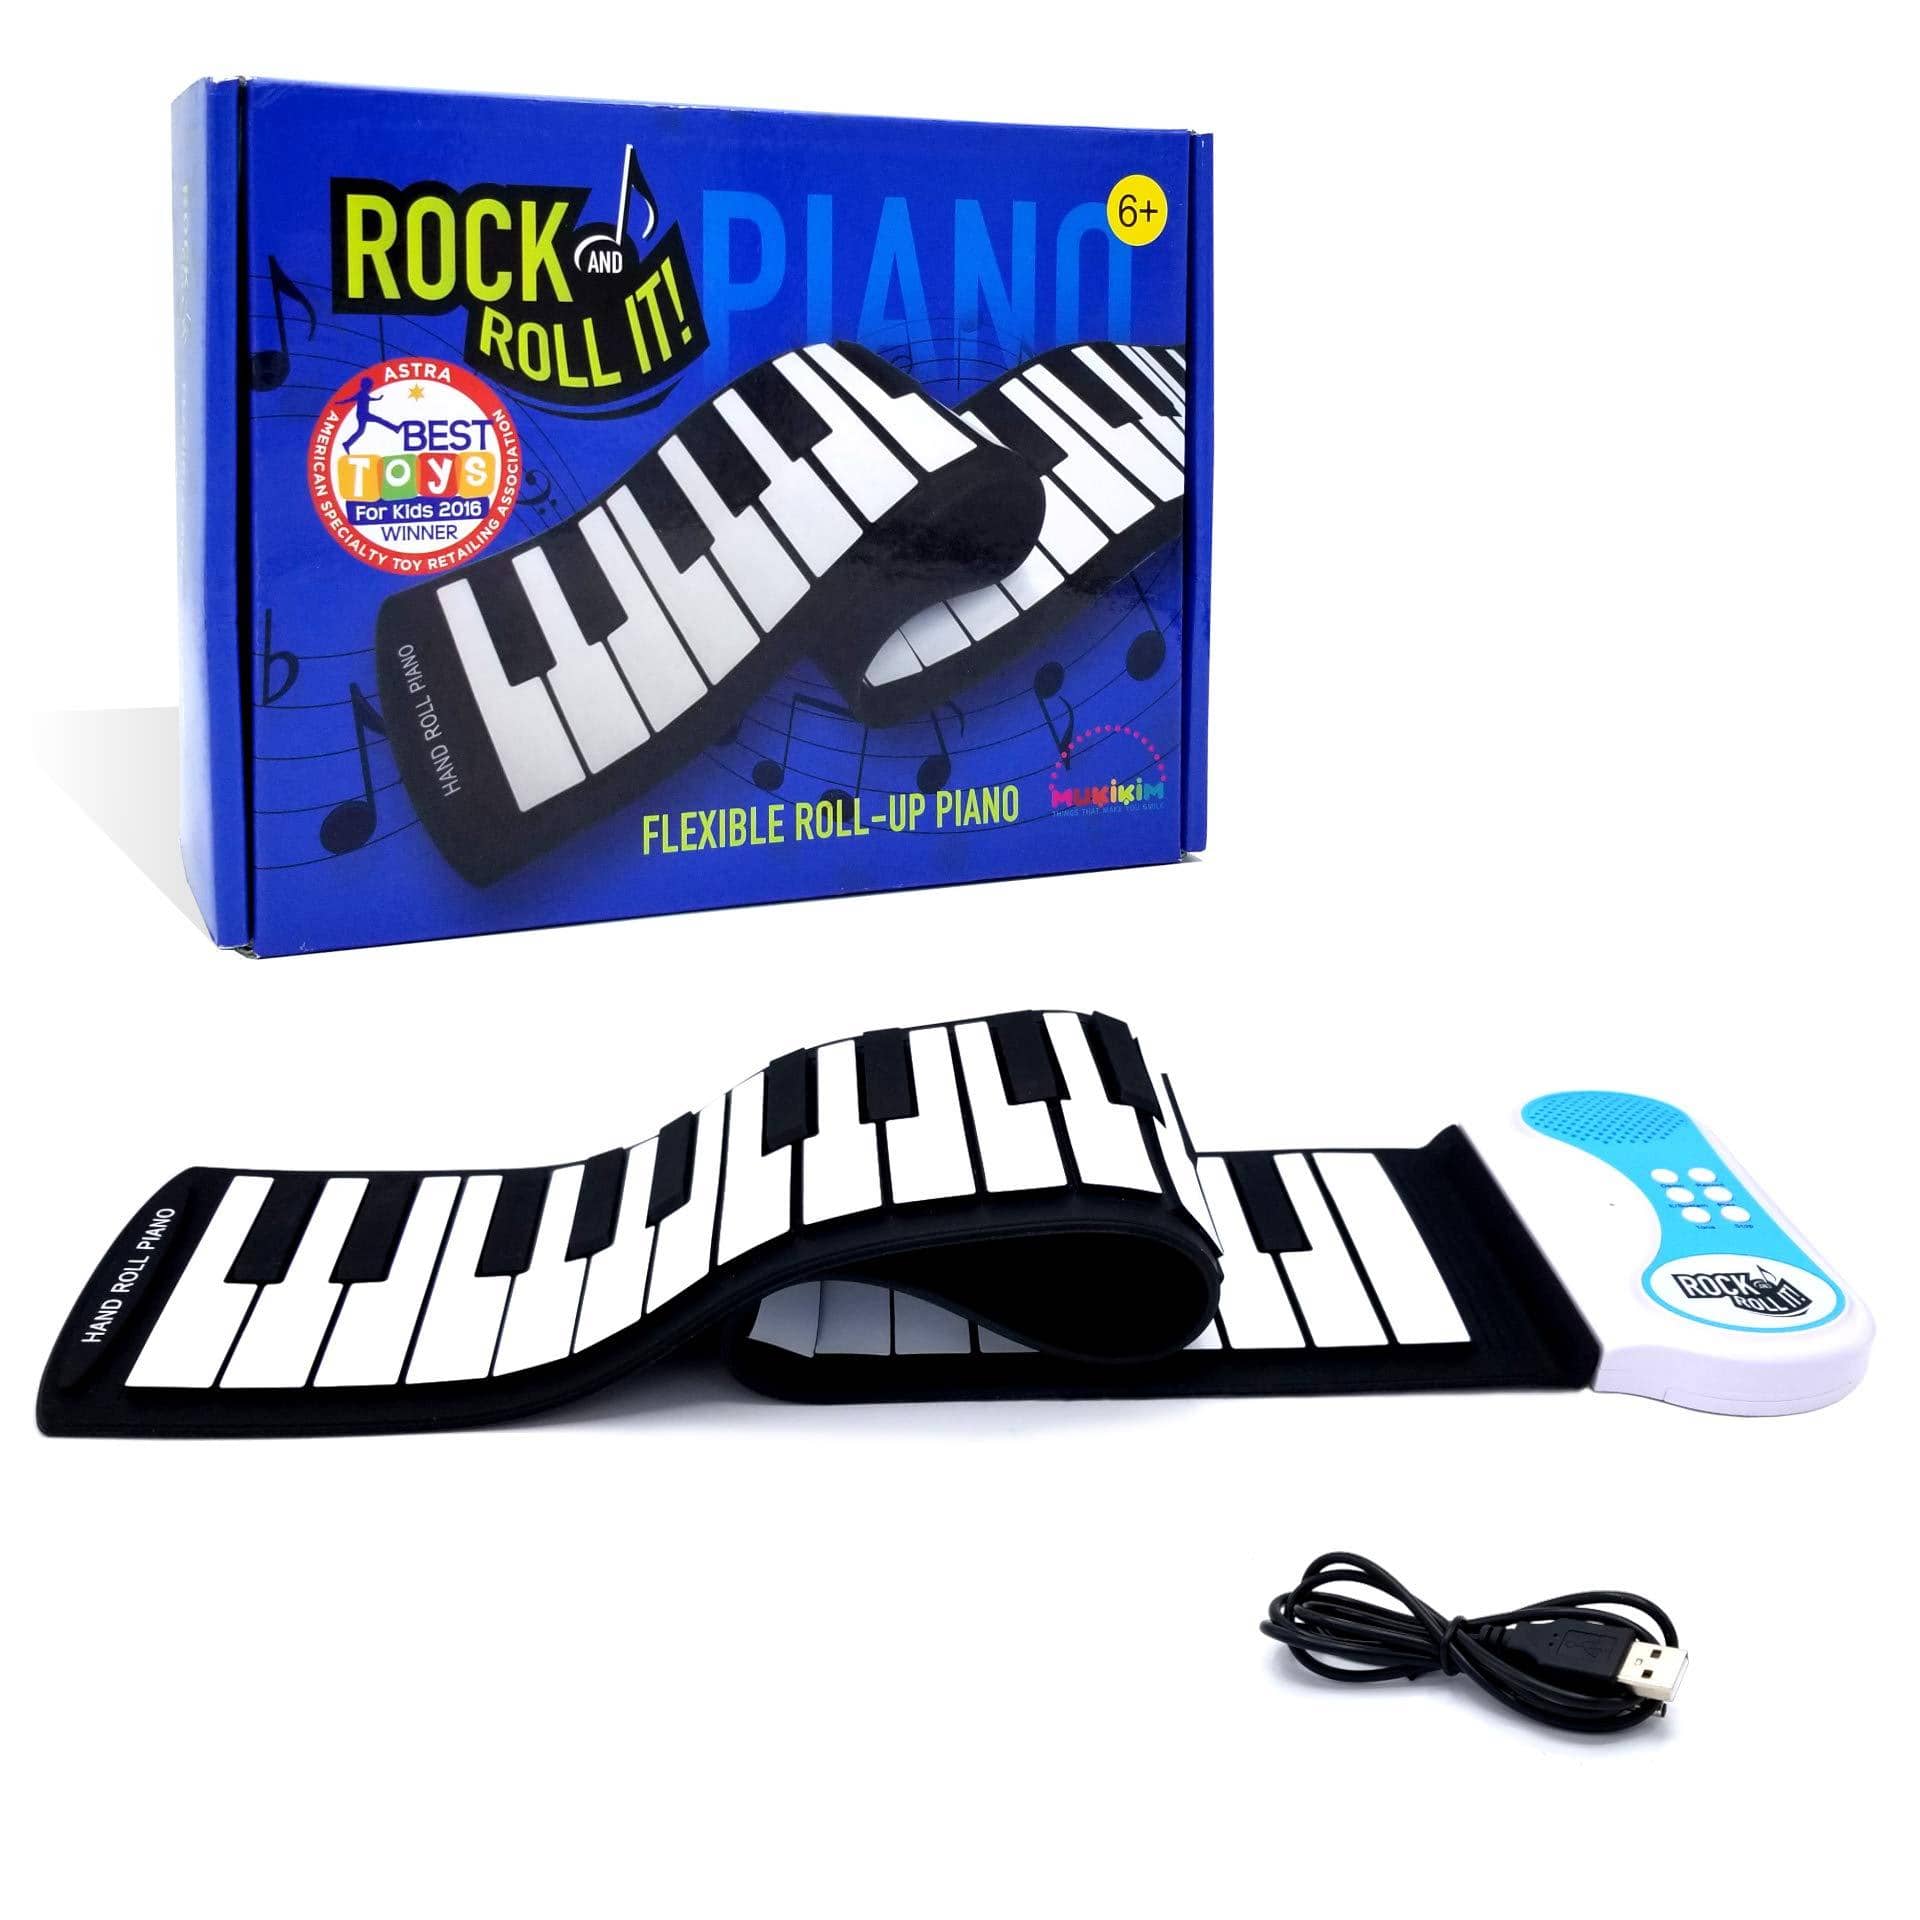 Rock and Roll It! Flexible Roll-Up Piano